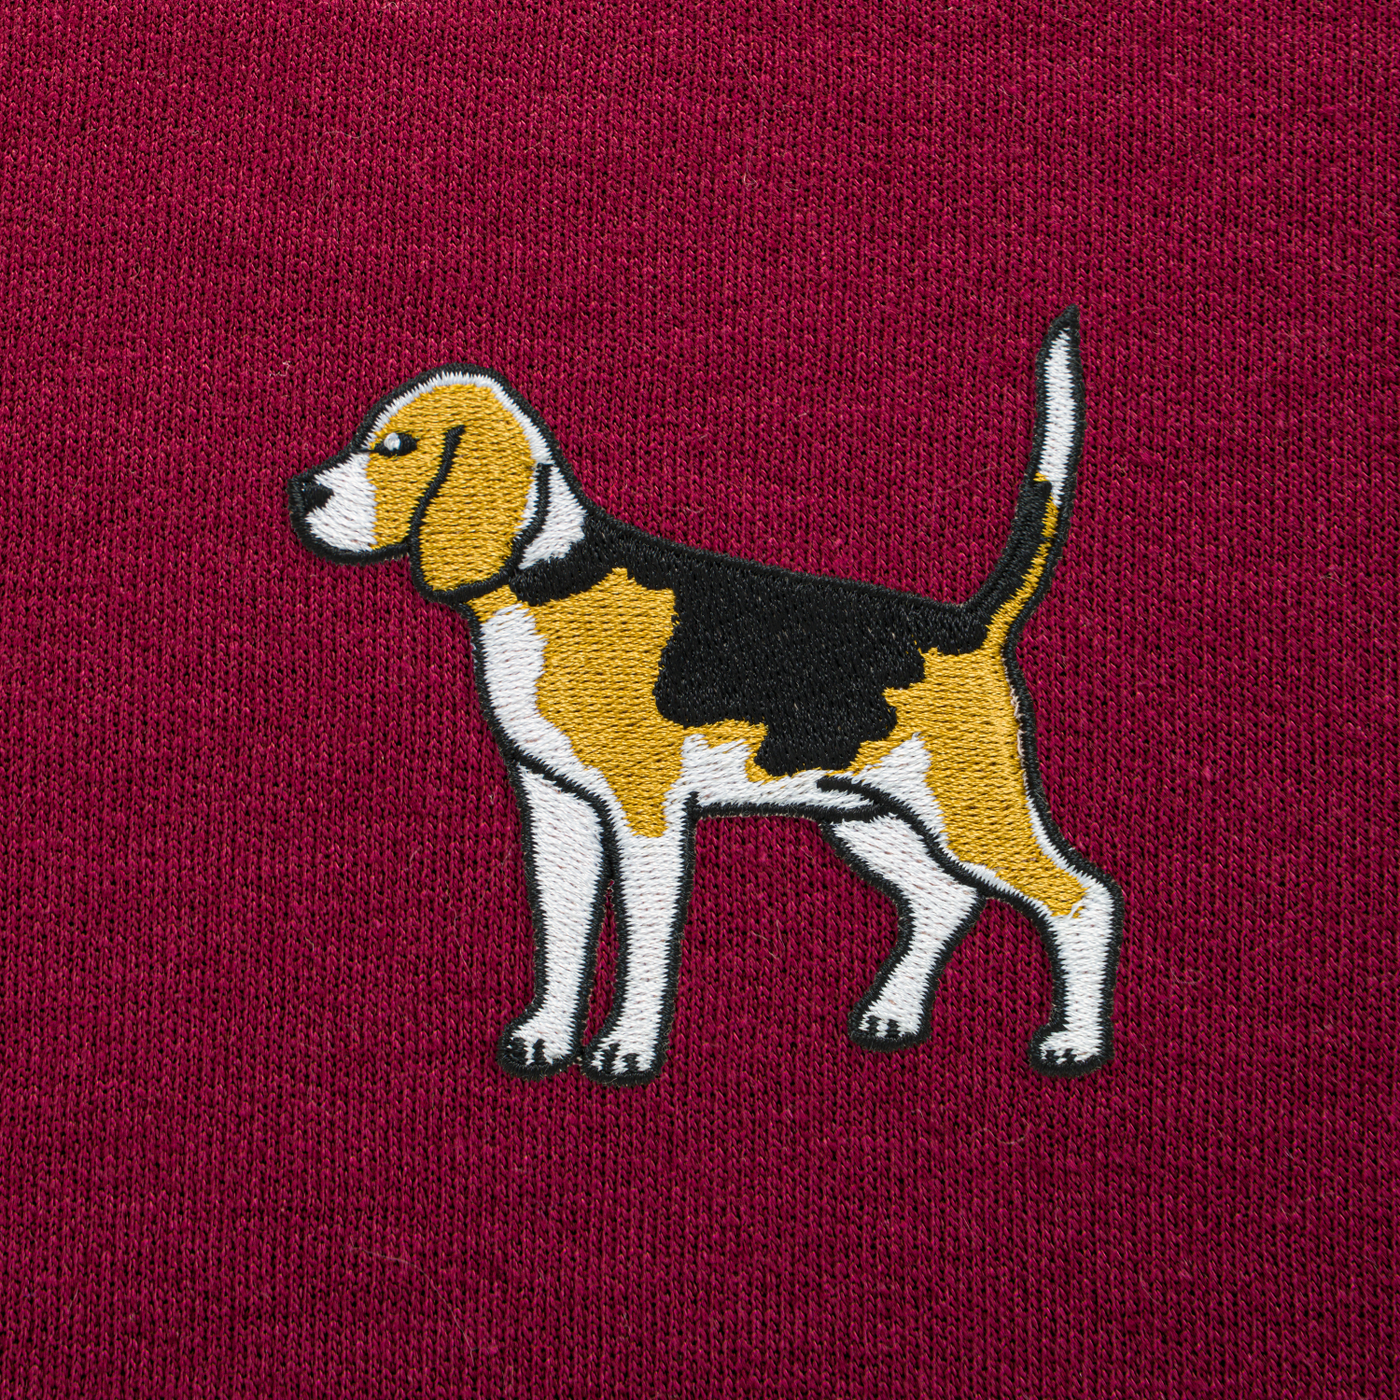 Bobby's Planet Men's Embroidered Beagle Sweatshirt from Paws Dog Cat Animals Collection in Maroon Color#color_maroon